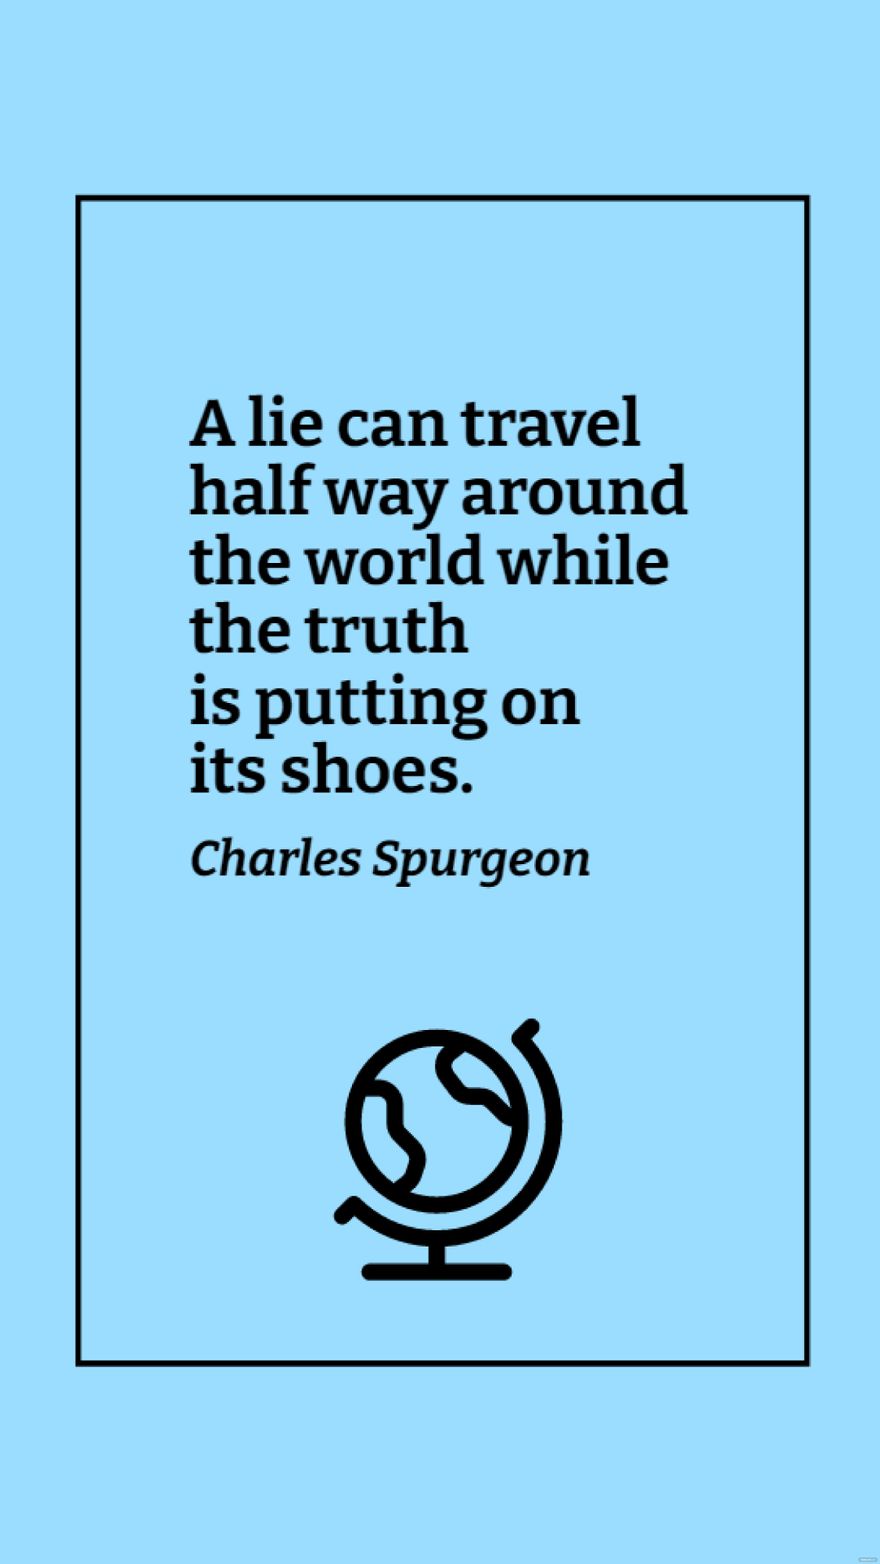 Charles Spurgeon - A lie can travel half way around the world while the truth is putting on its shoes. in JPG